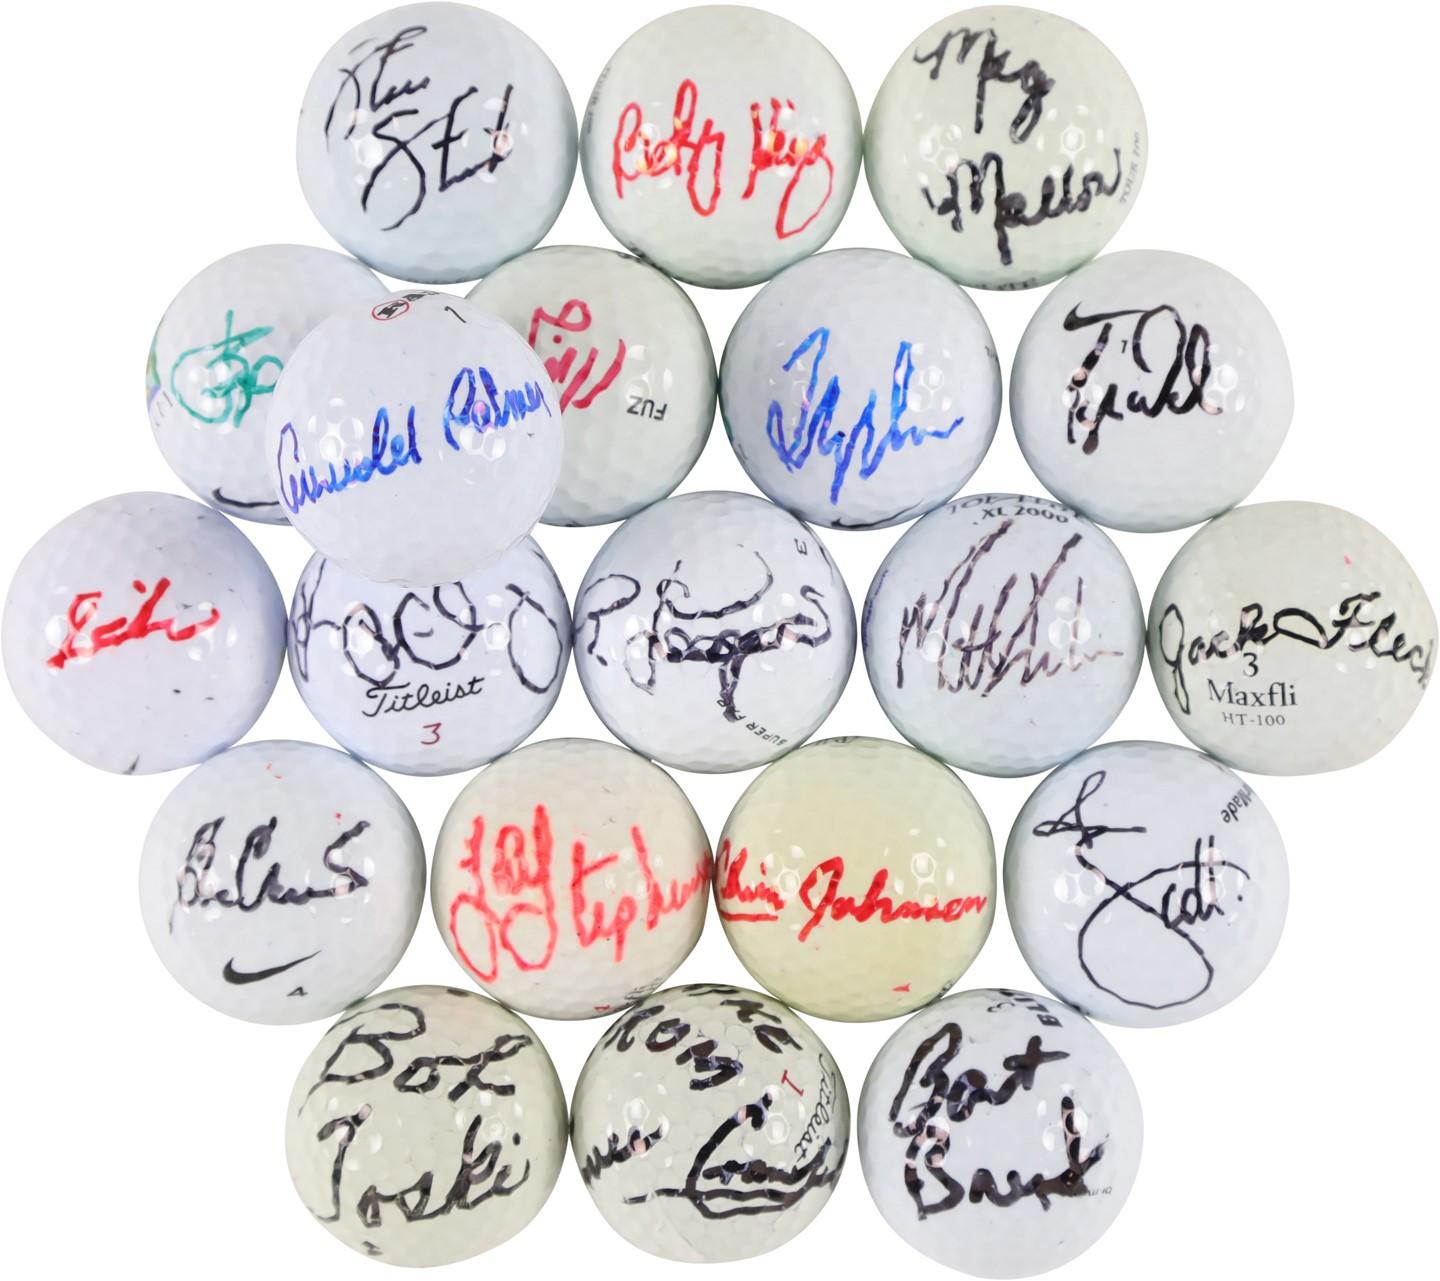 Olympics and All Sports - Signed Golf Ball Collection (116)